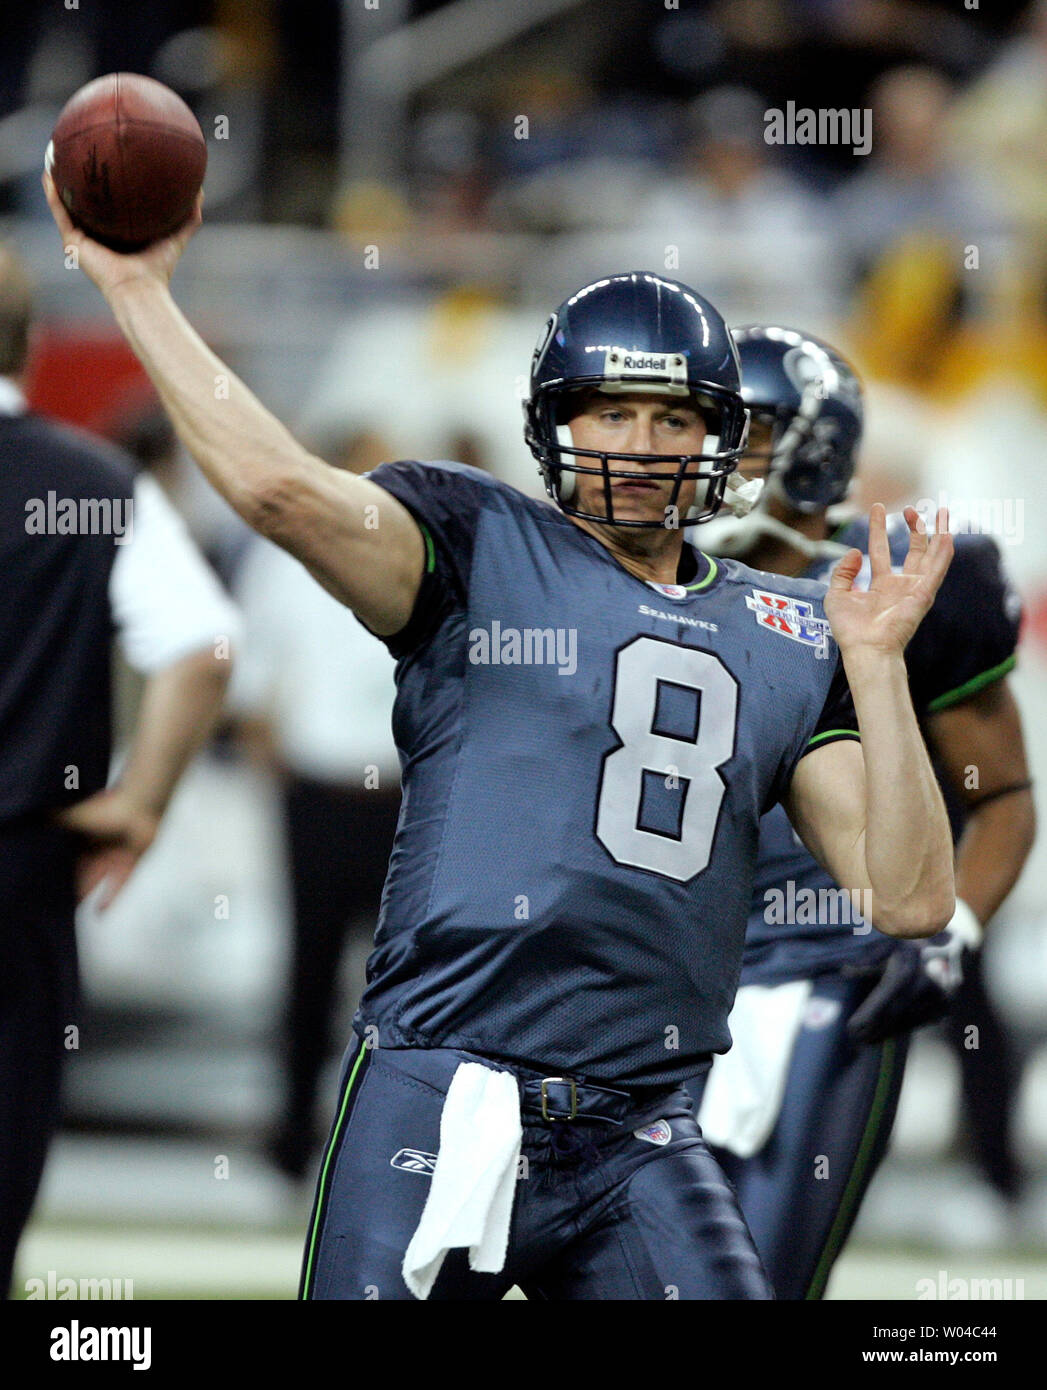 Matt Hasselbeck, Seattle Seahawks quarterback warms up at Super Bowl XL  featuring the Seattle Seahawks and the Pittsburgh Steelers at Ford Field in  Detroit, Mi., on February 5, 2006. (UPI Photo/Brian Kersey